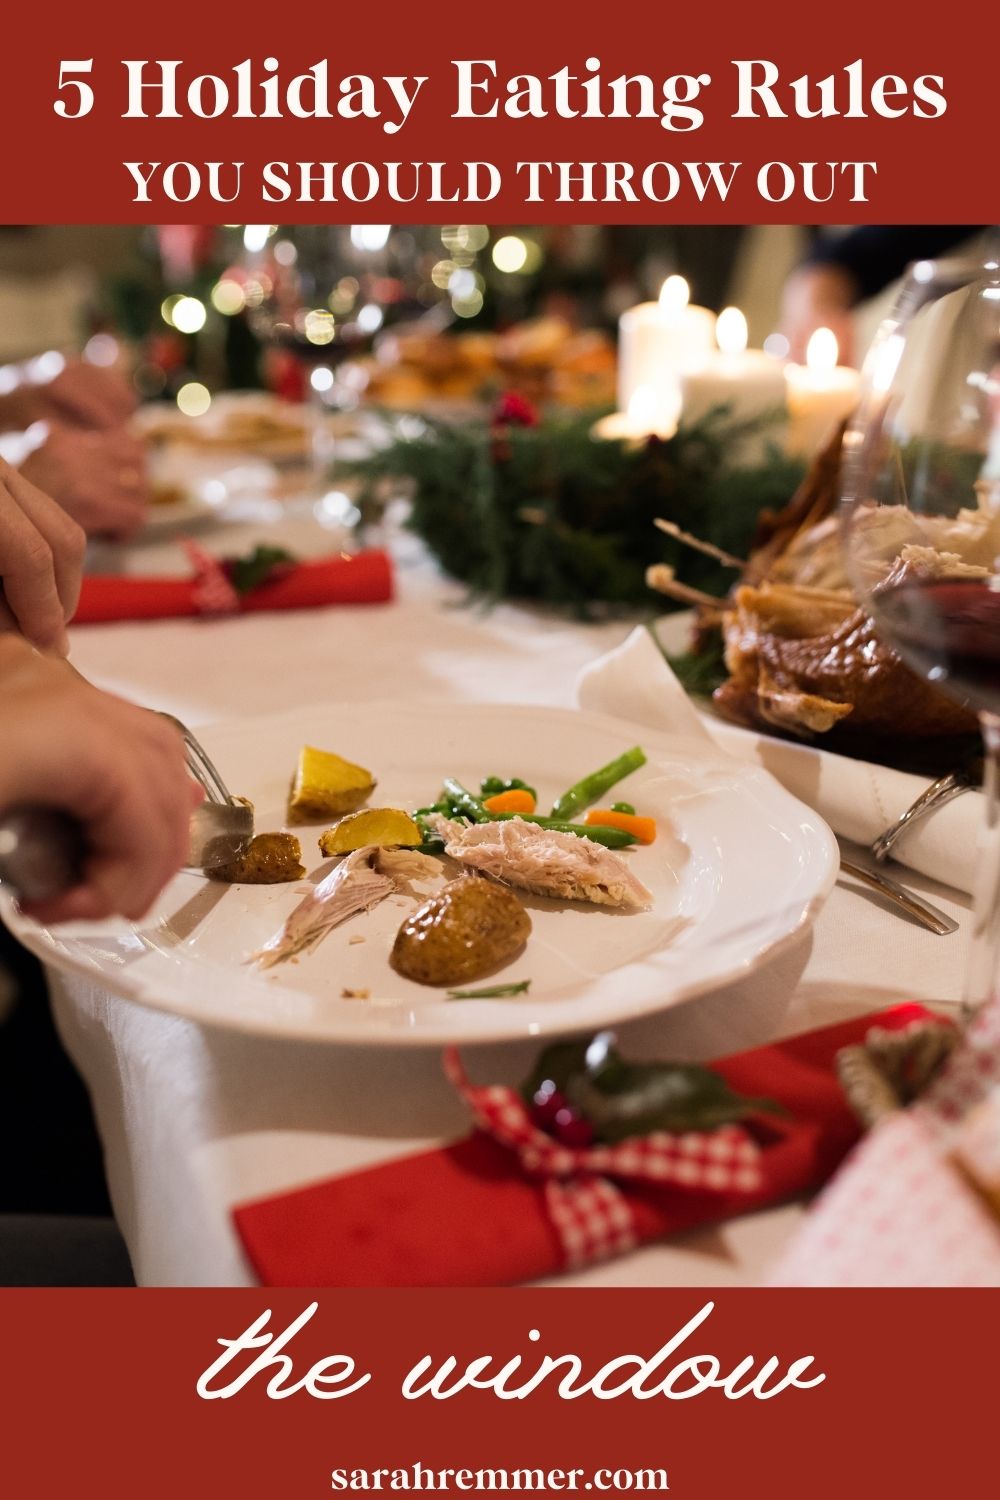 5 Holiday Eating Rules You Should Throw out the Window